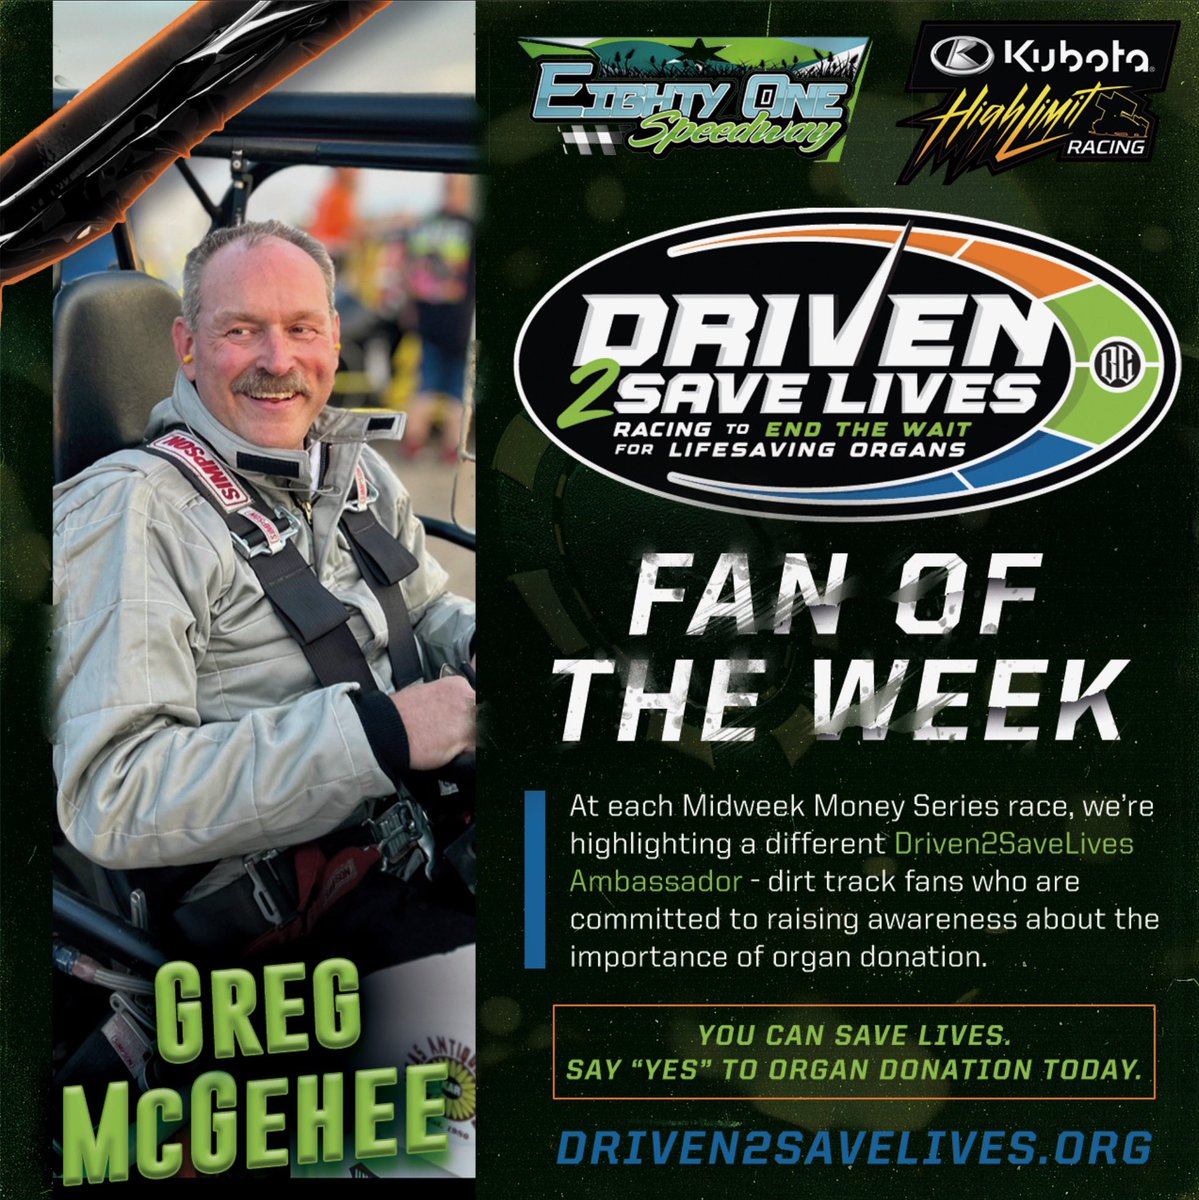 Meet Greg McGehee — this week’s @Driven2Save Fan of the Week: 'I joined Driven2SaveLives after being inspired by the story of Bryan’s heart donation on ESPN. I also signed up to be a donor at the Chili Bowl one year. I want to be an ambassador to spread the word about donation…